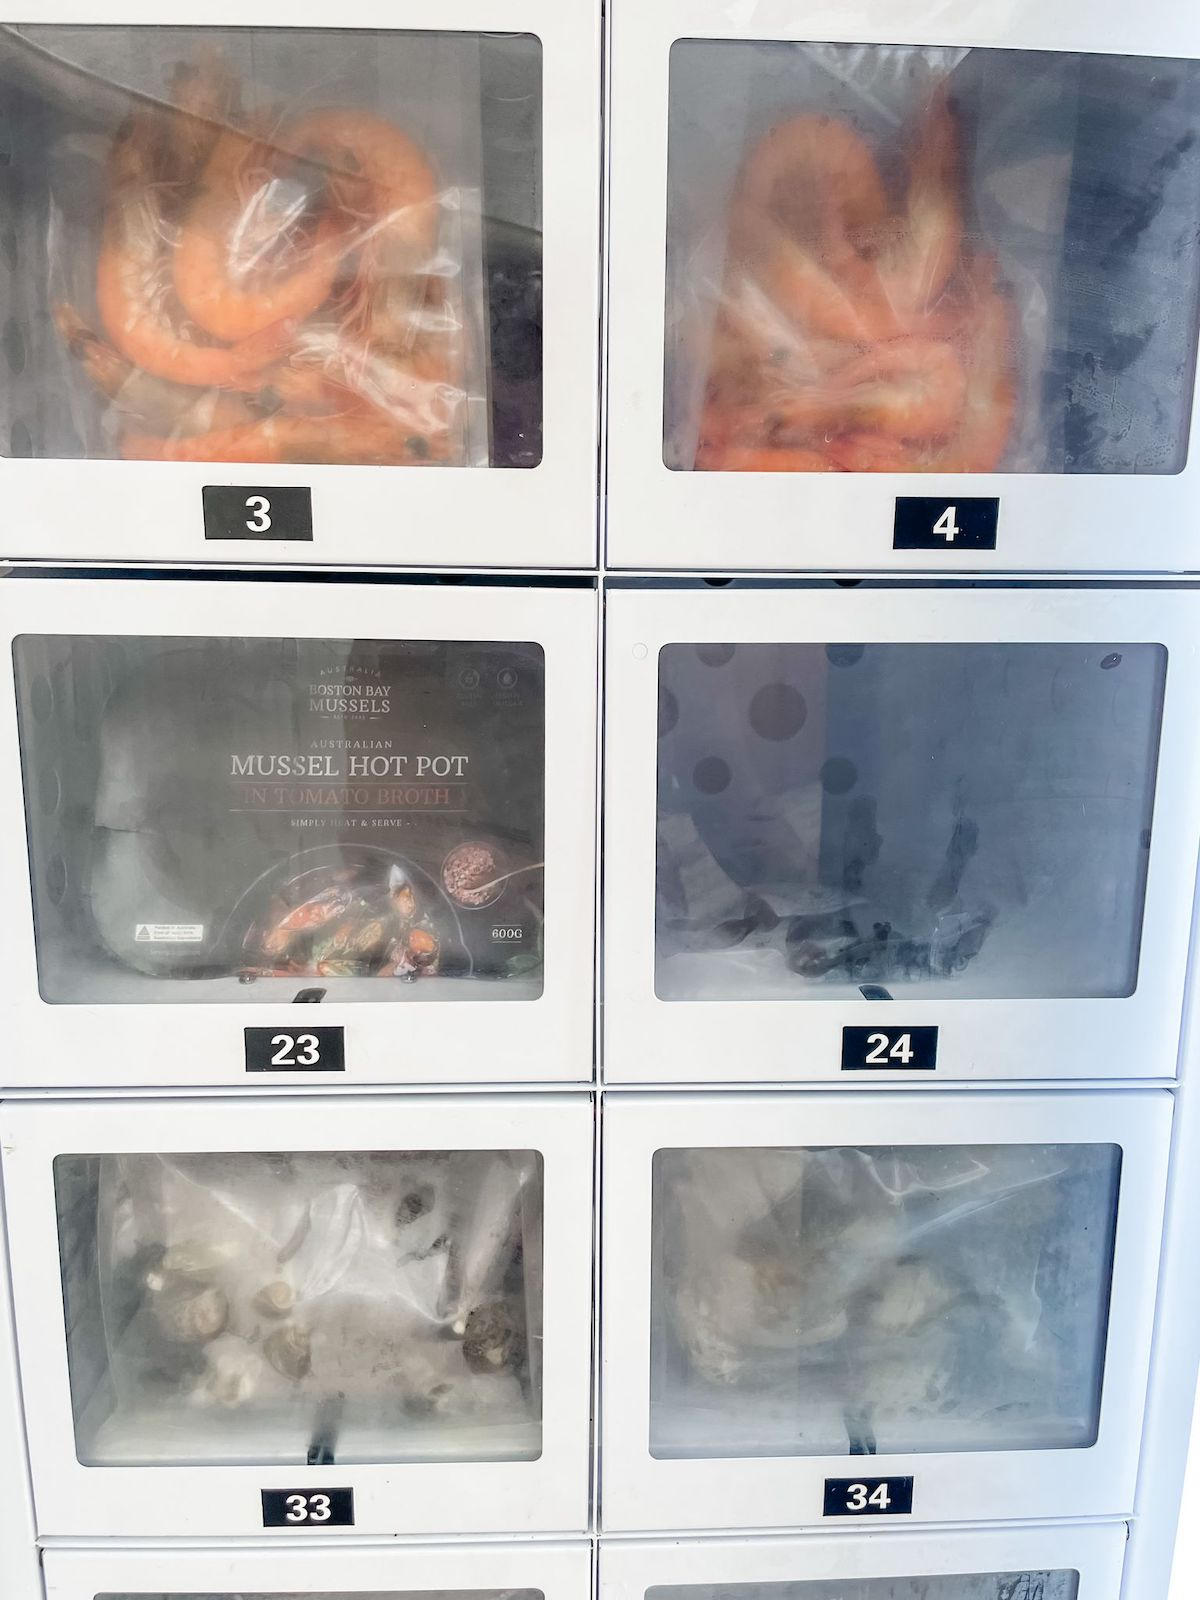 Beef vending machine in the France